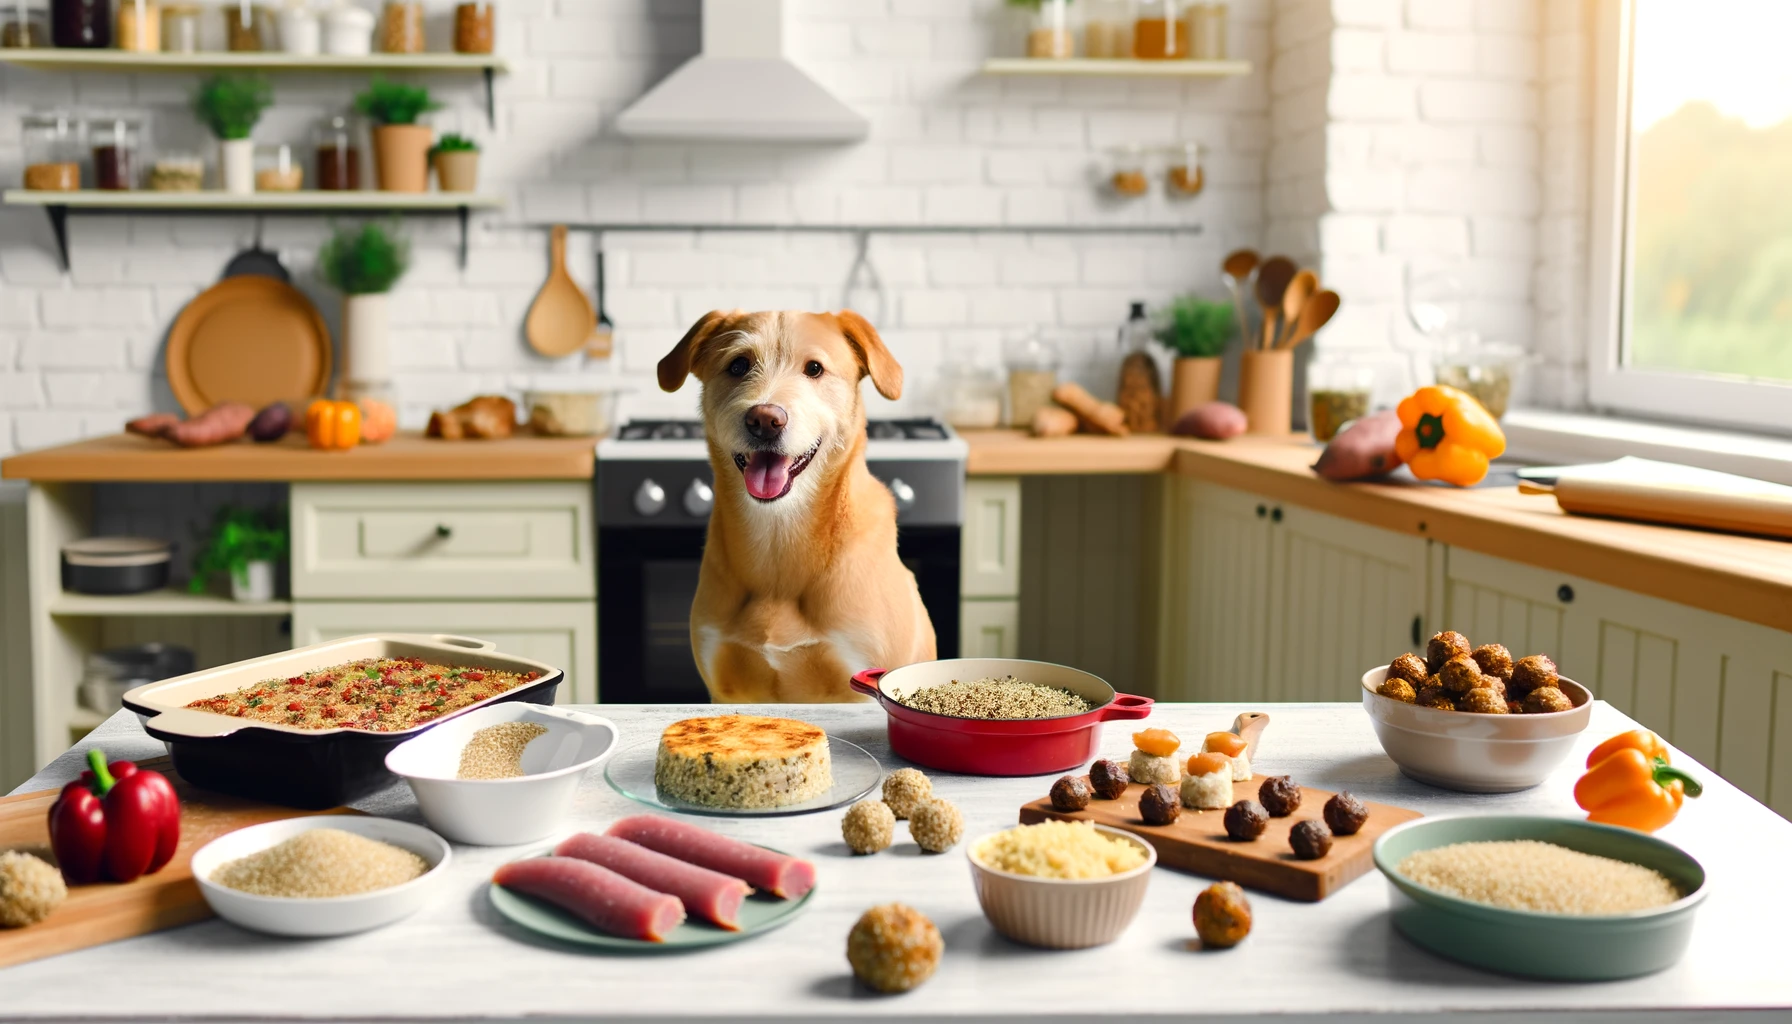 dog sitting in a kitchen filled with natural light, surrounded by ingredients and dishes that include quinoa in their rec